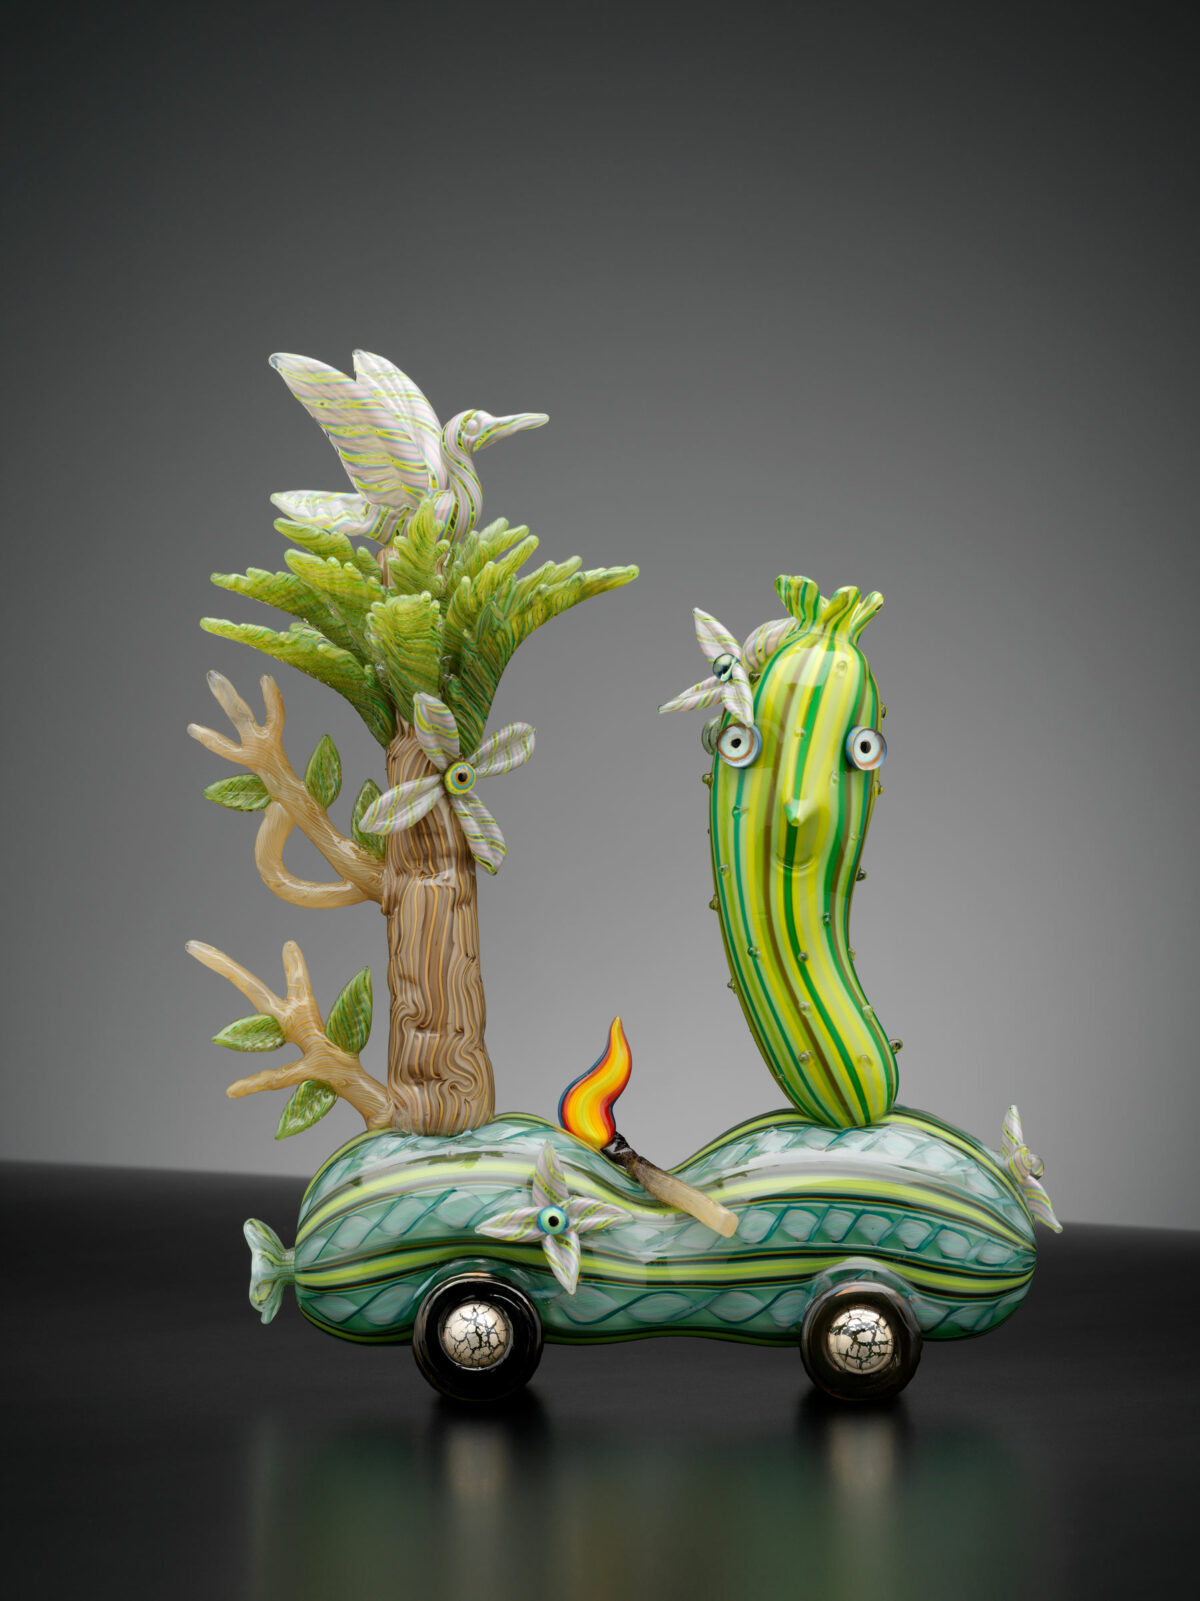 Fascinating Glass Sculptures Of Quirky Creatures And Objects By Tom Moore 22